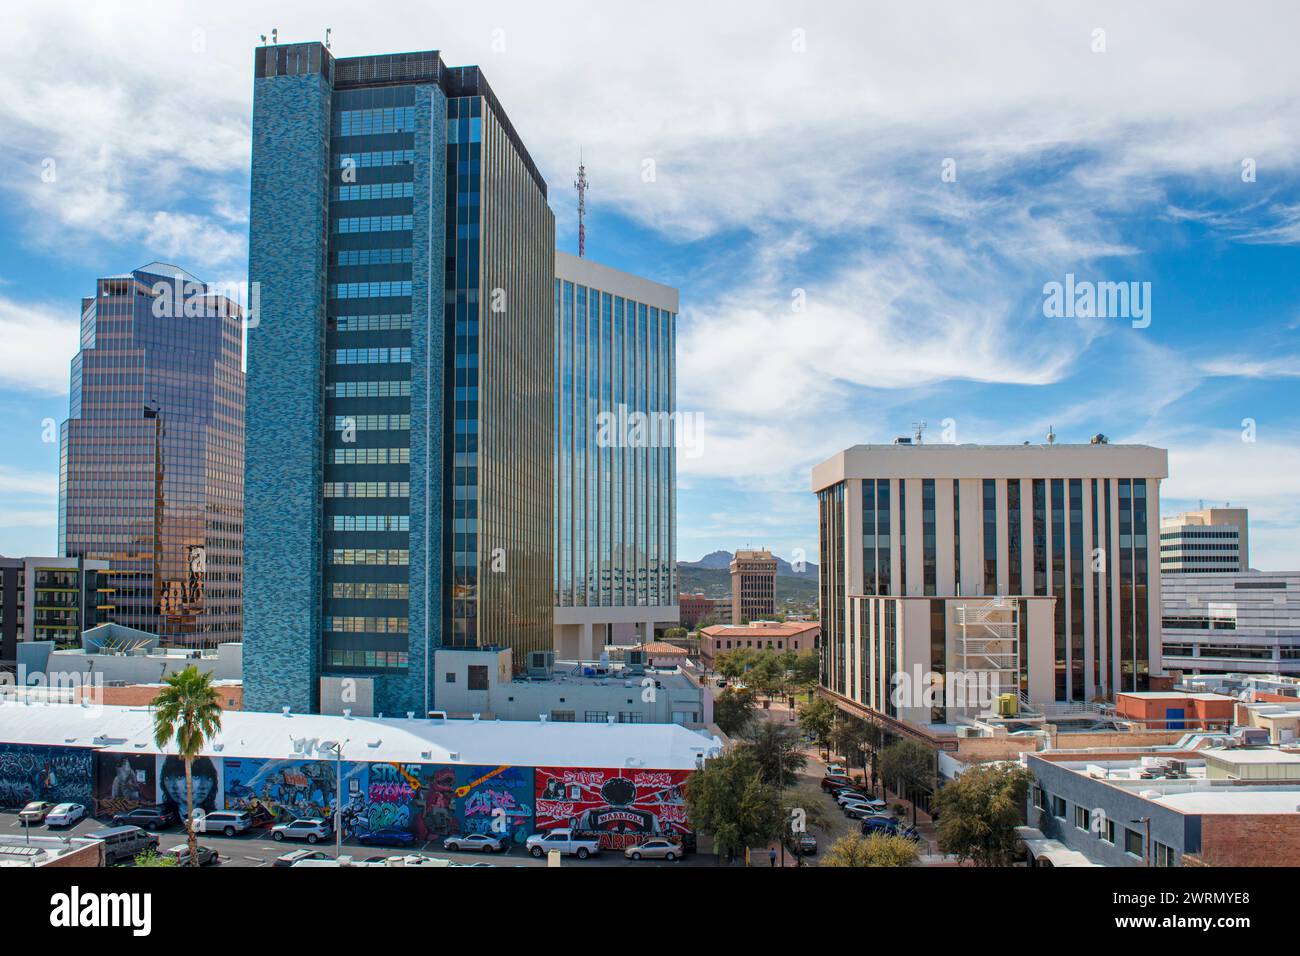 View of the wall murals and skyscrapers of downtown Tucson in Arizona Stock Photo